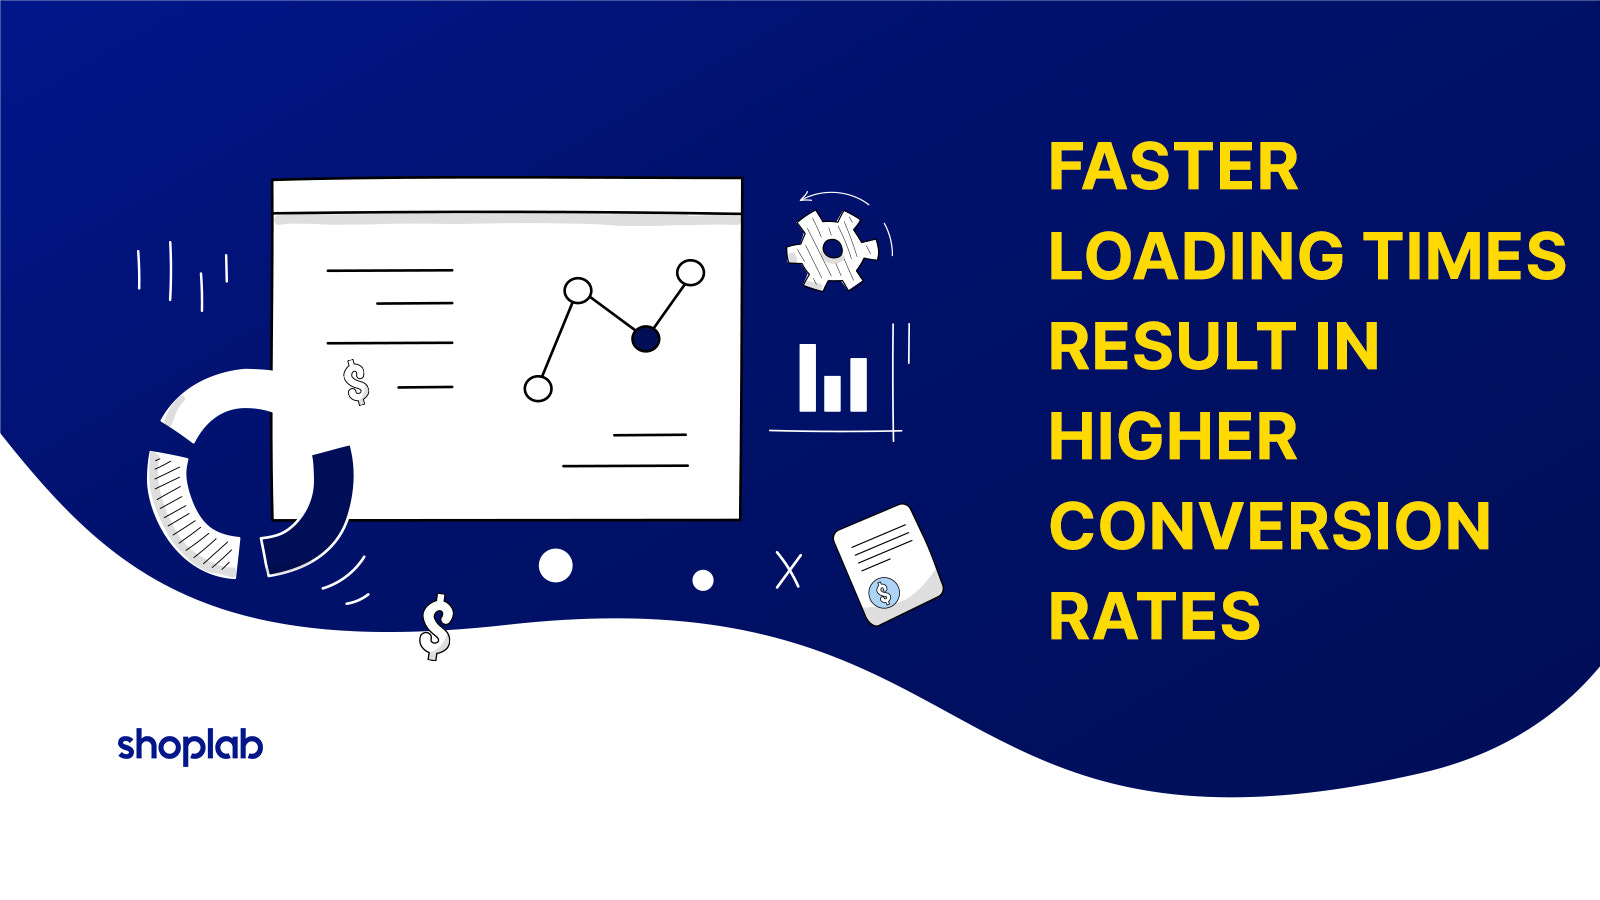 Faster loading times result in higher conversion rates